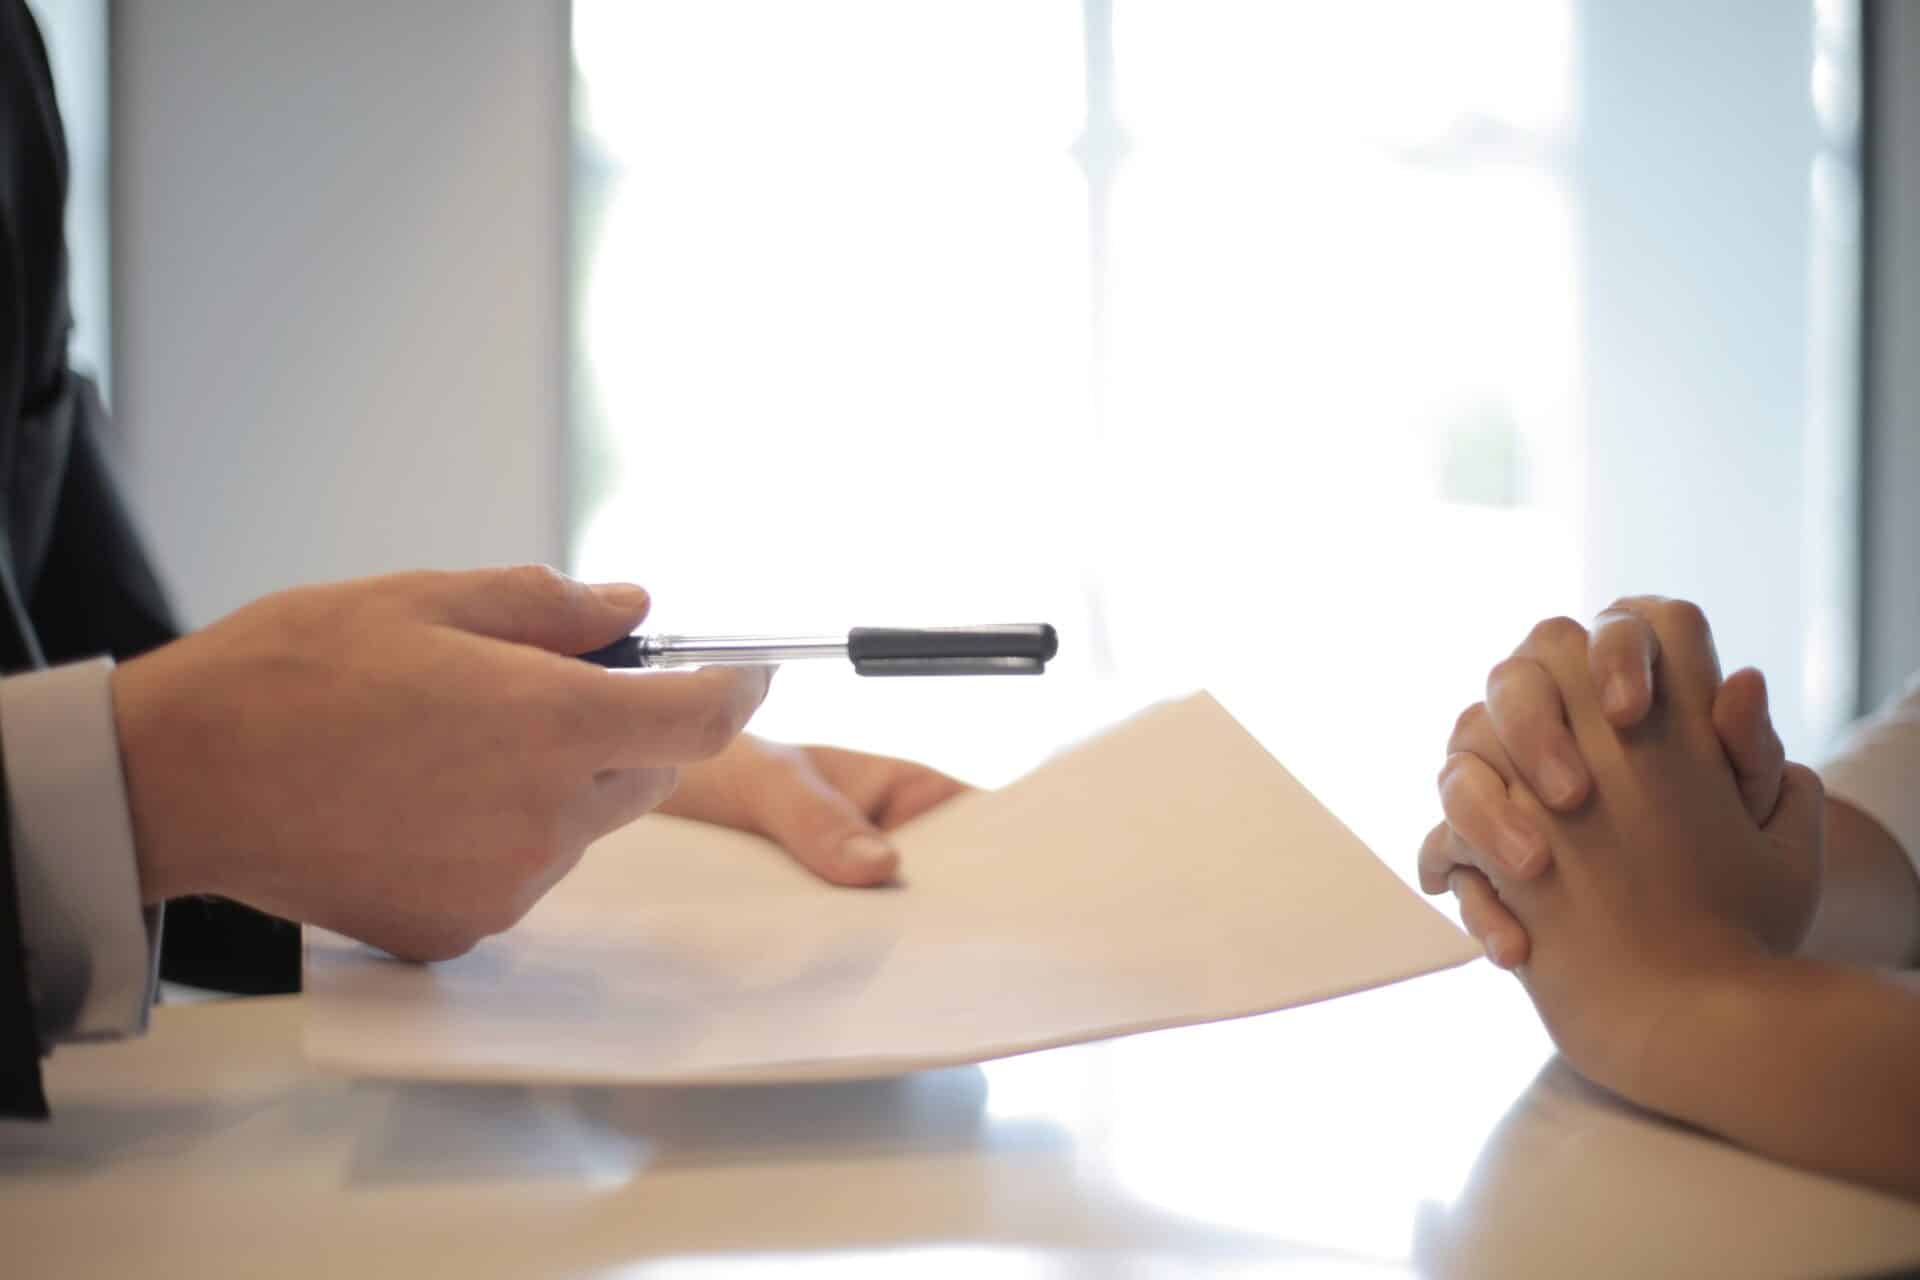 hands visible of two people sitting across from each other one person holding a pen and paper